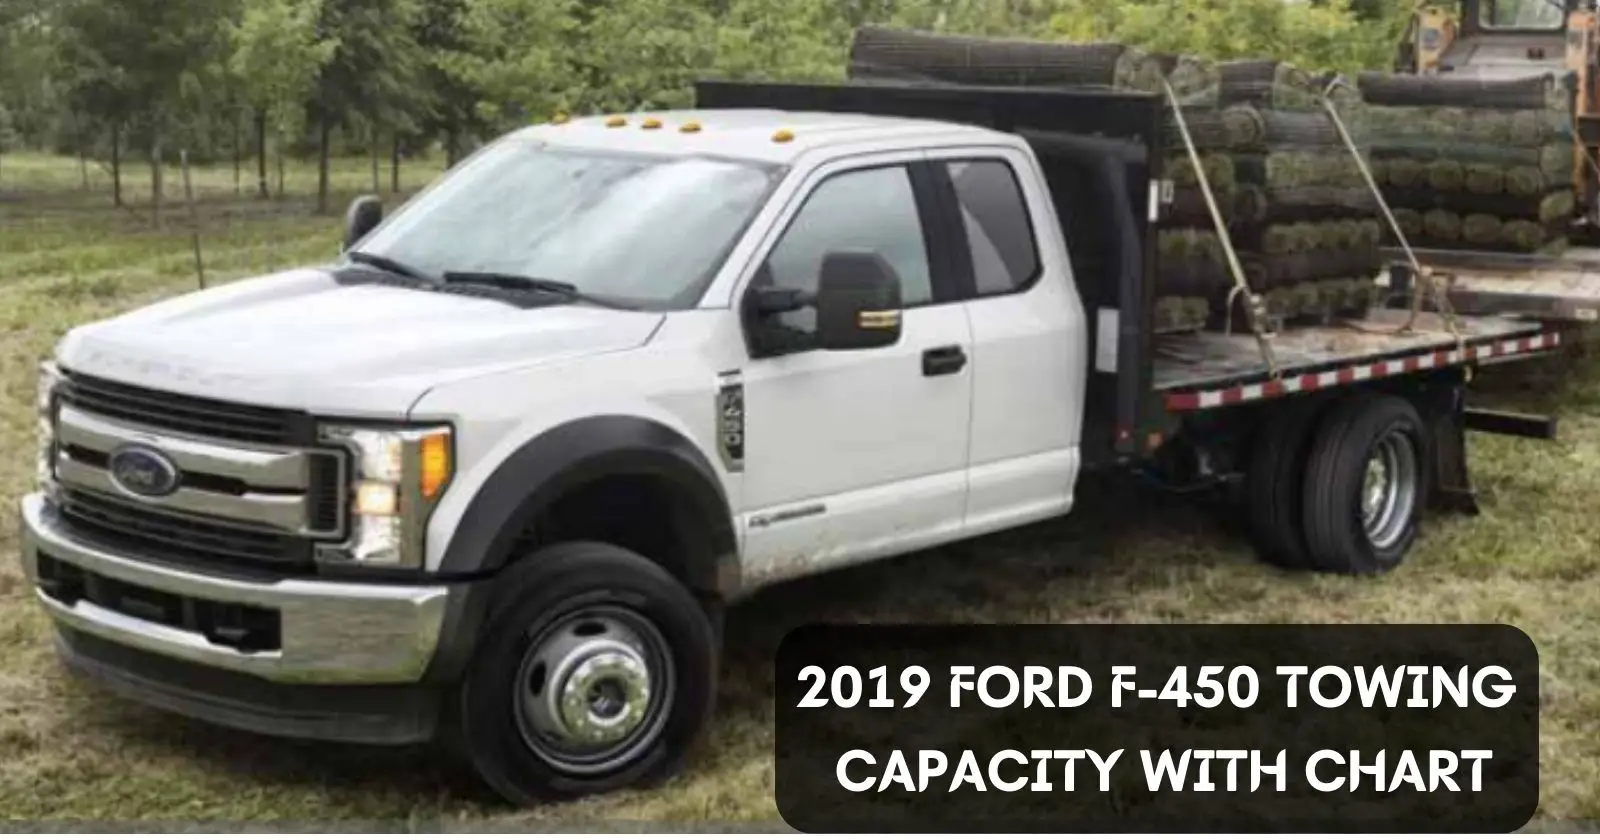 2019-ford-f-450-towing-capacity-with-chart-thecartowing